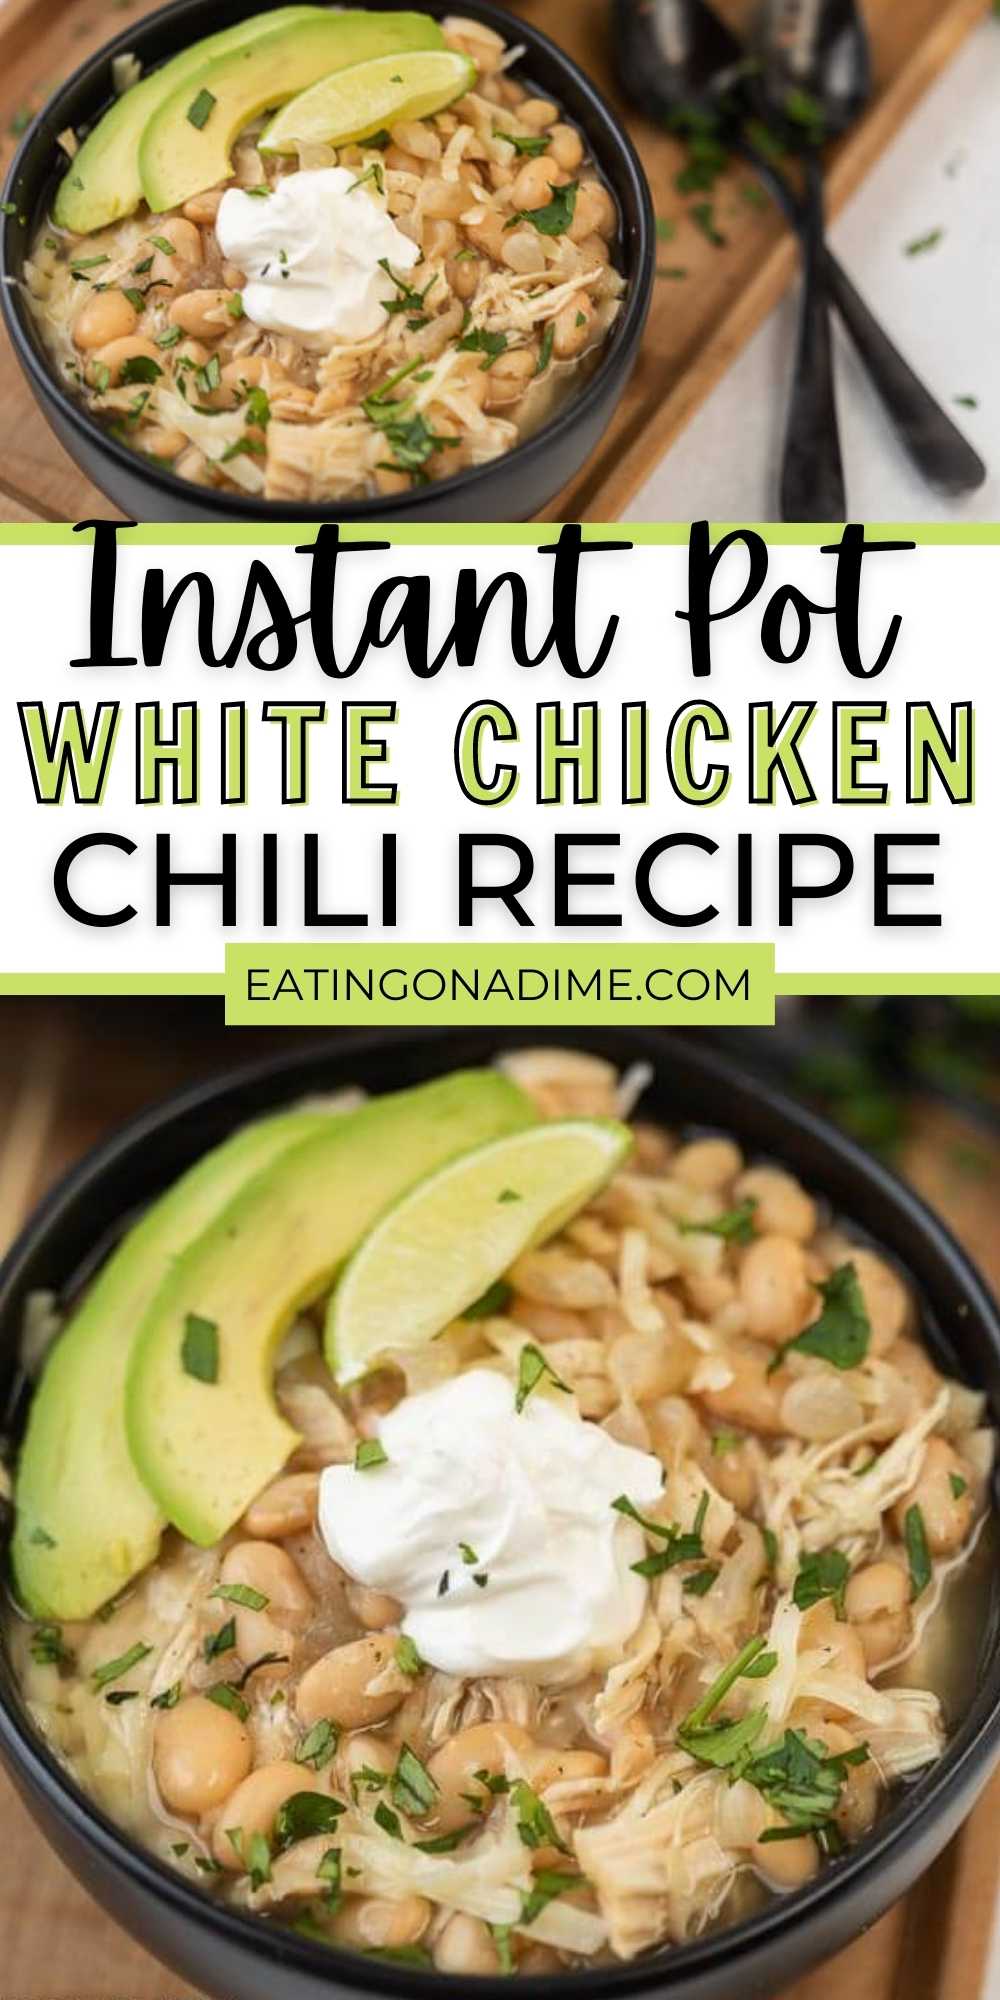 Try this twist on traditional chili with Instant Pot White Chicken Chili Recipe. We love this Pressure Cooker White Bean Chicken Chili Recipe full of northern beans, salsa verde and more! White Chicken Chili Pressure Cooker Recipe is quick and easy plus healthy too! #eatingonadime #instantpotrecipes #chickenrecipes #chilirecipes #pressurecookerrecipes 
